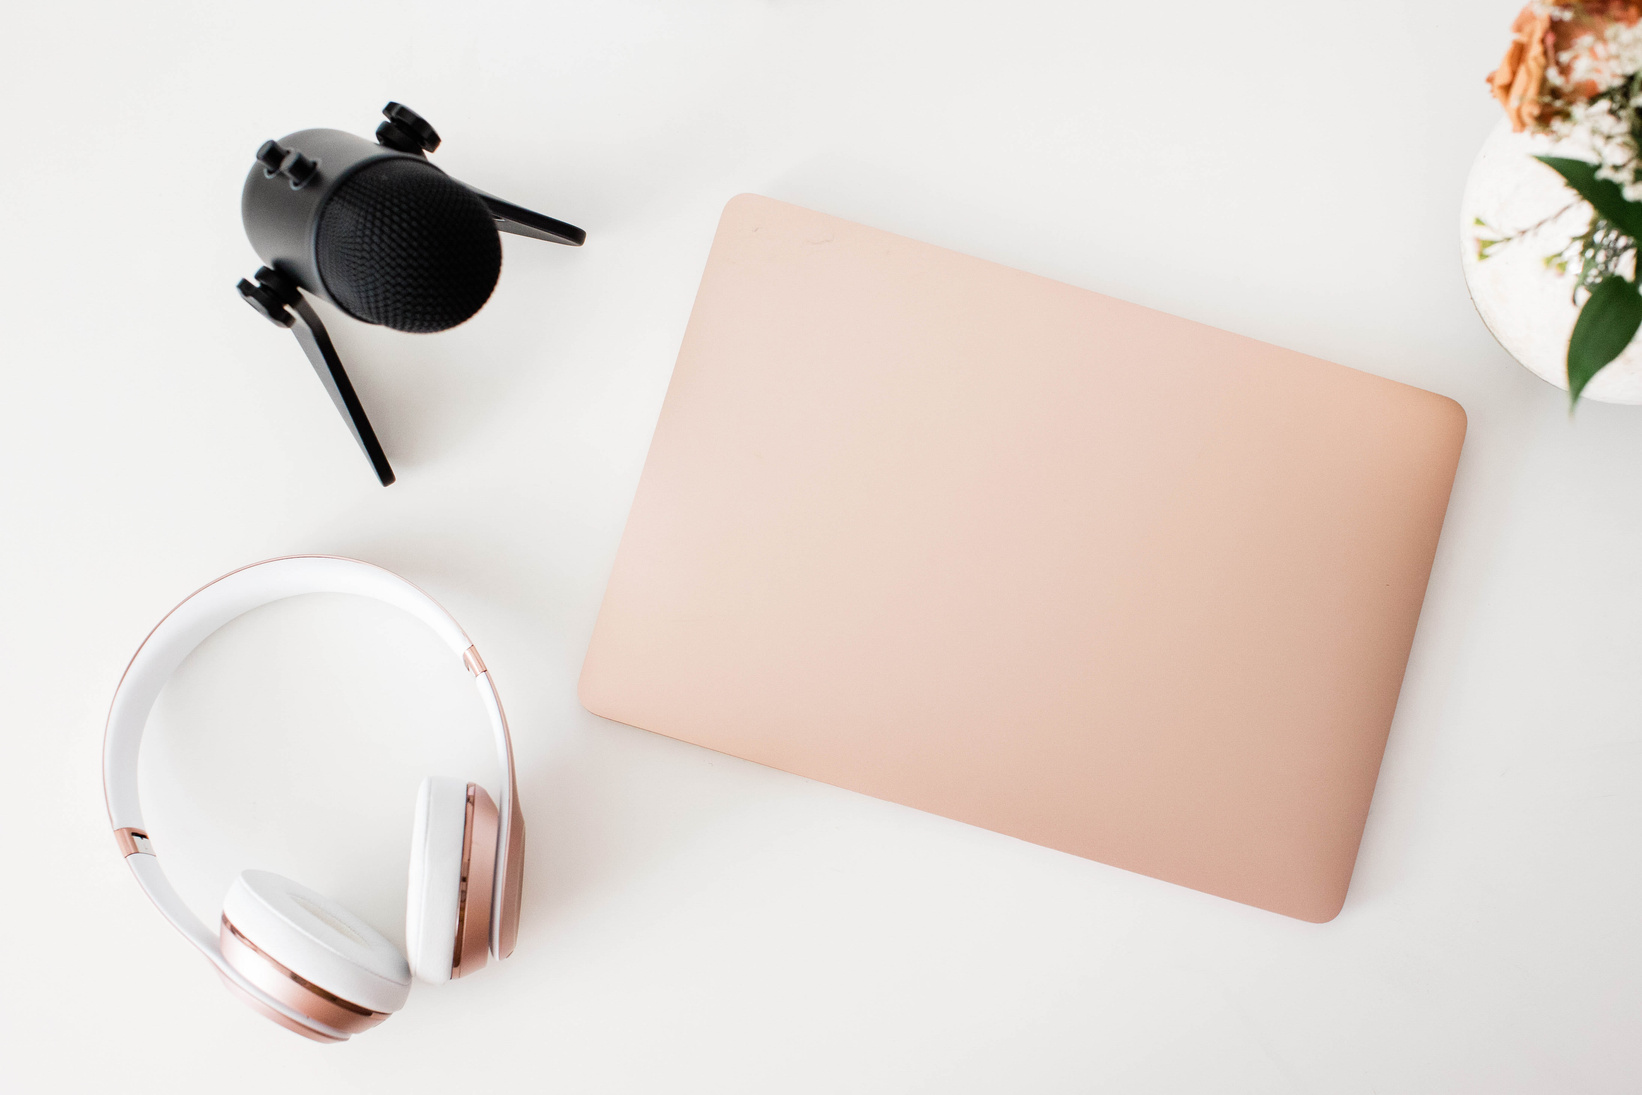 Wireless Microphone, Headphones and Laptop for Podcasting Flatlay